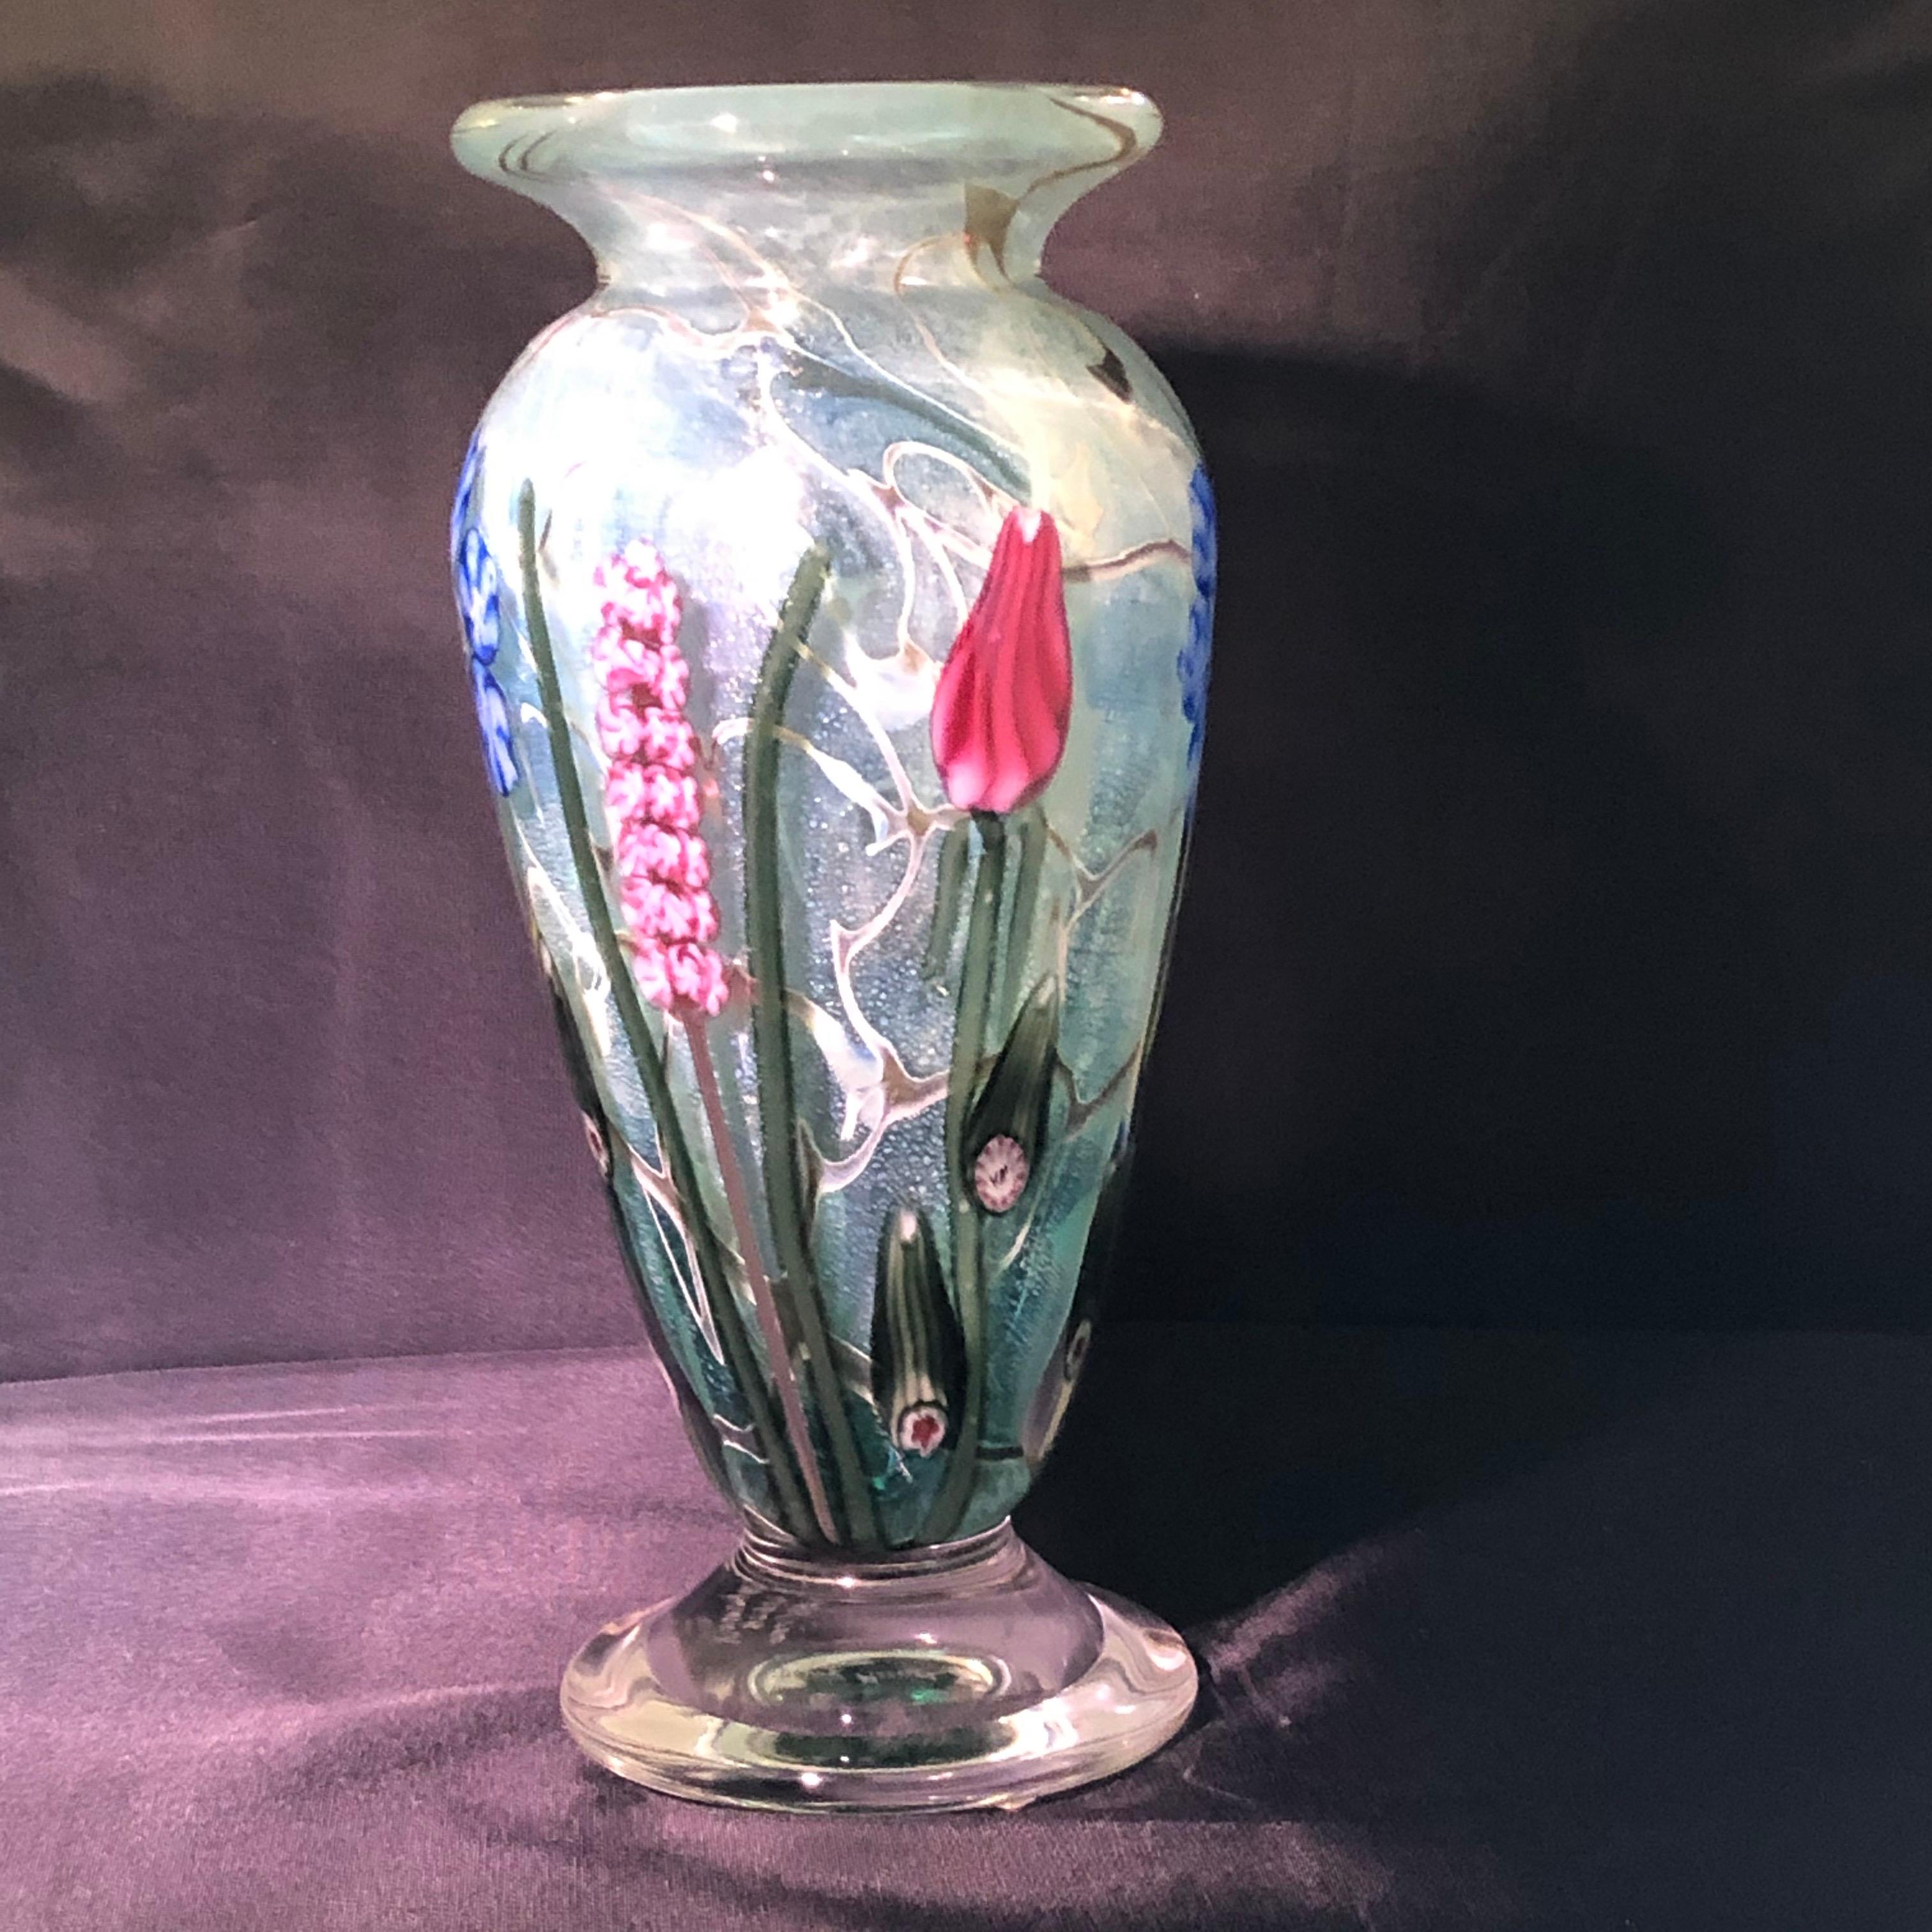 Hand blown Vandermark art glass vase decorated with outstanding bright colored spring flowers on a green colored background. It was hand blown so when the light hits the vase, you can see beautiful shimmering gold speckles throughout the vase. The